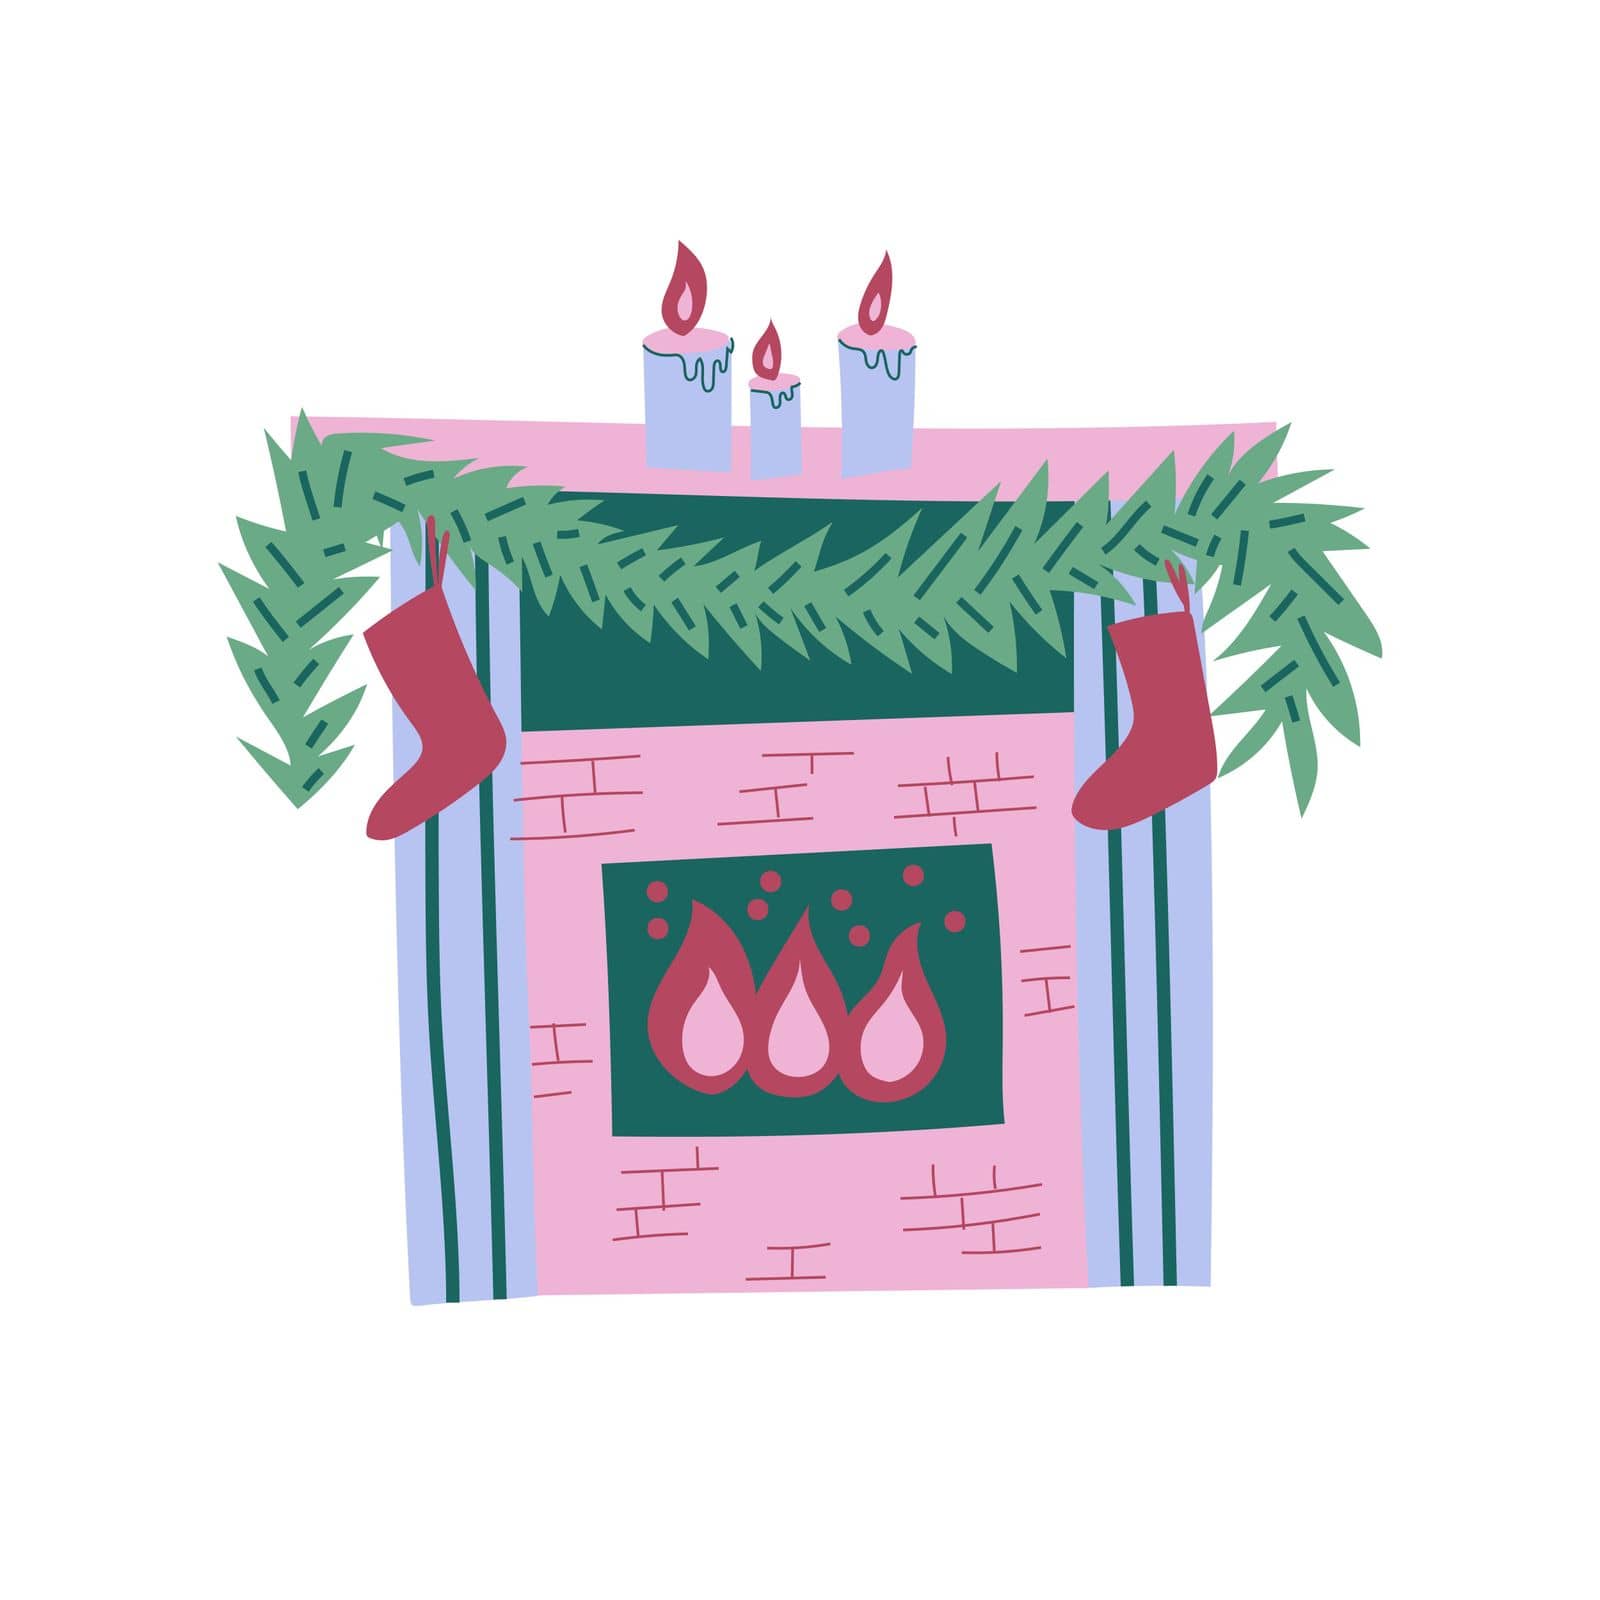 Cozy Christmas fireplace illustration. Holiday home decor with candles, garland and socks. Isolated on white background.